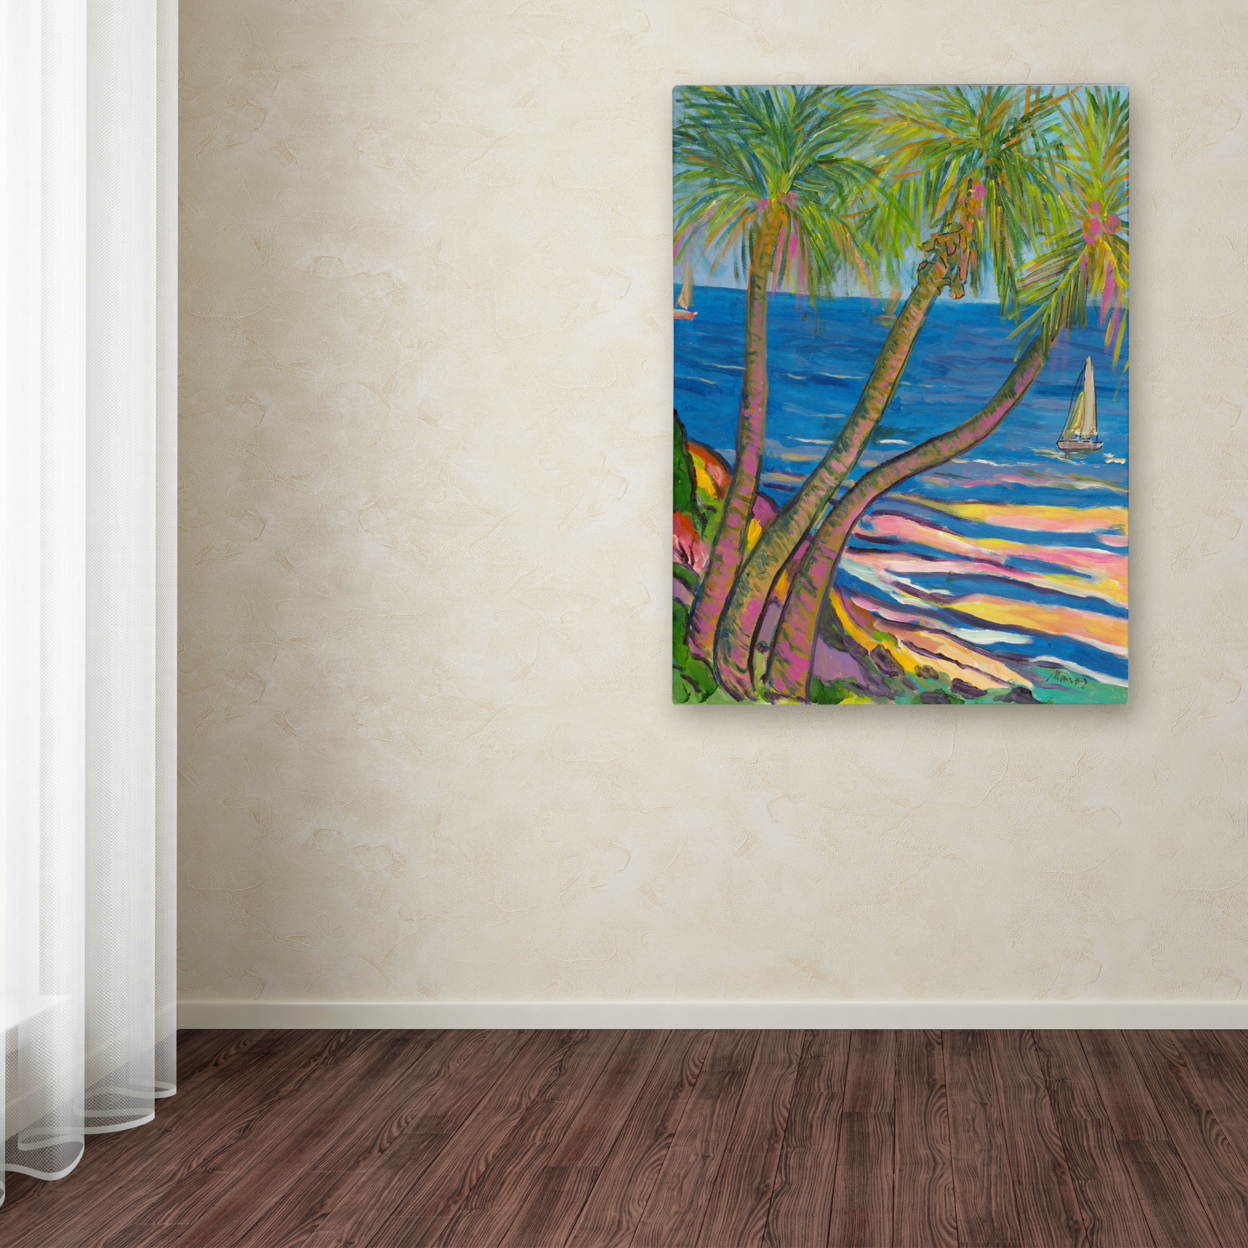 Manor Shadian 'Three Coconut Palms' Canvas Wall Art 35 X 47 Inches